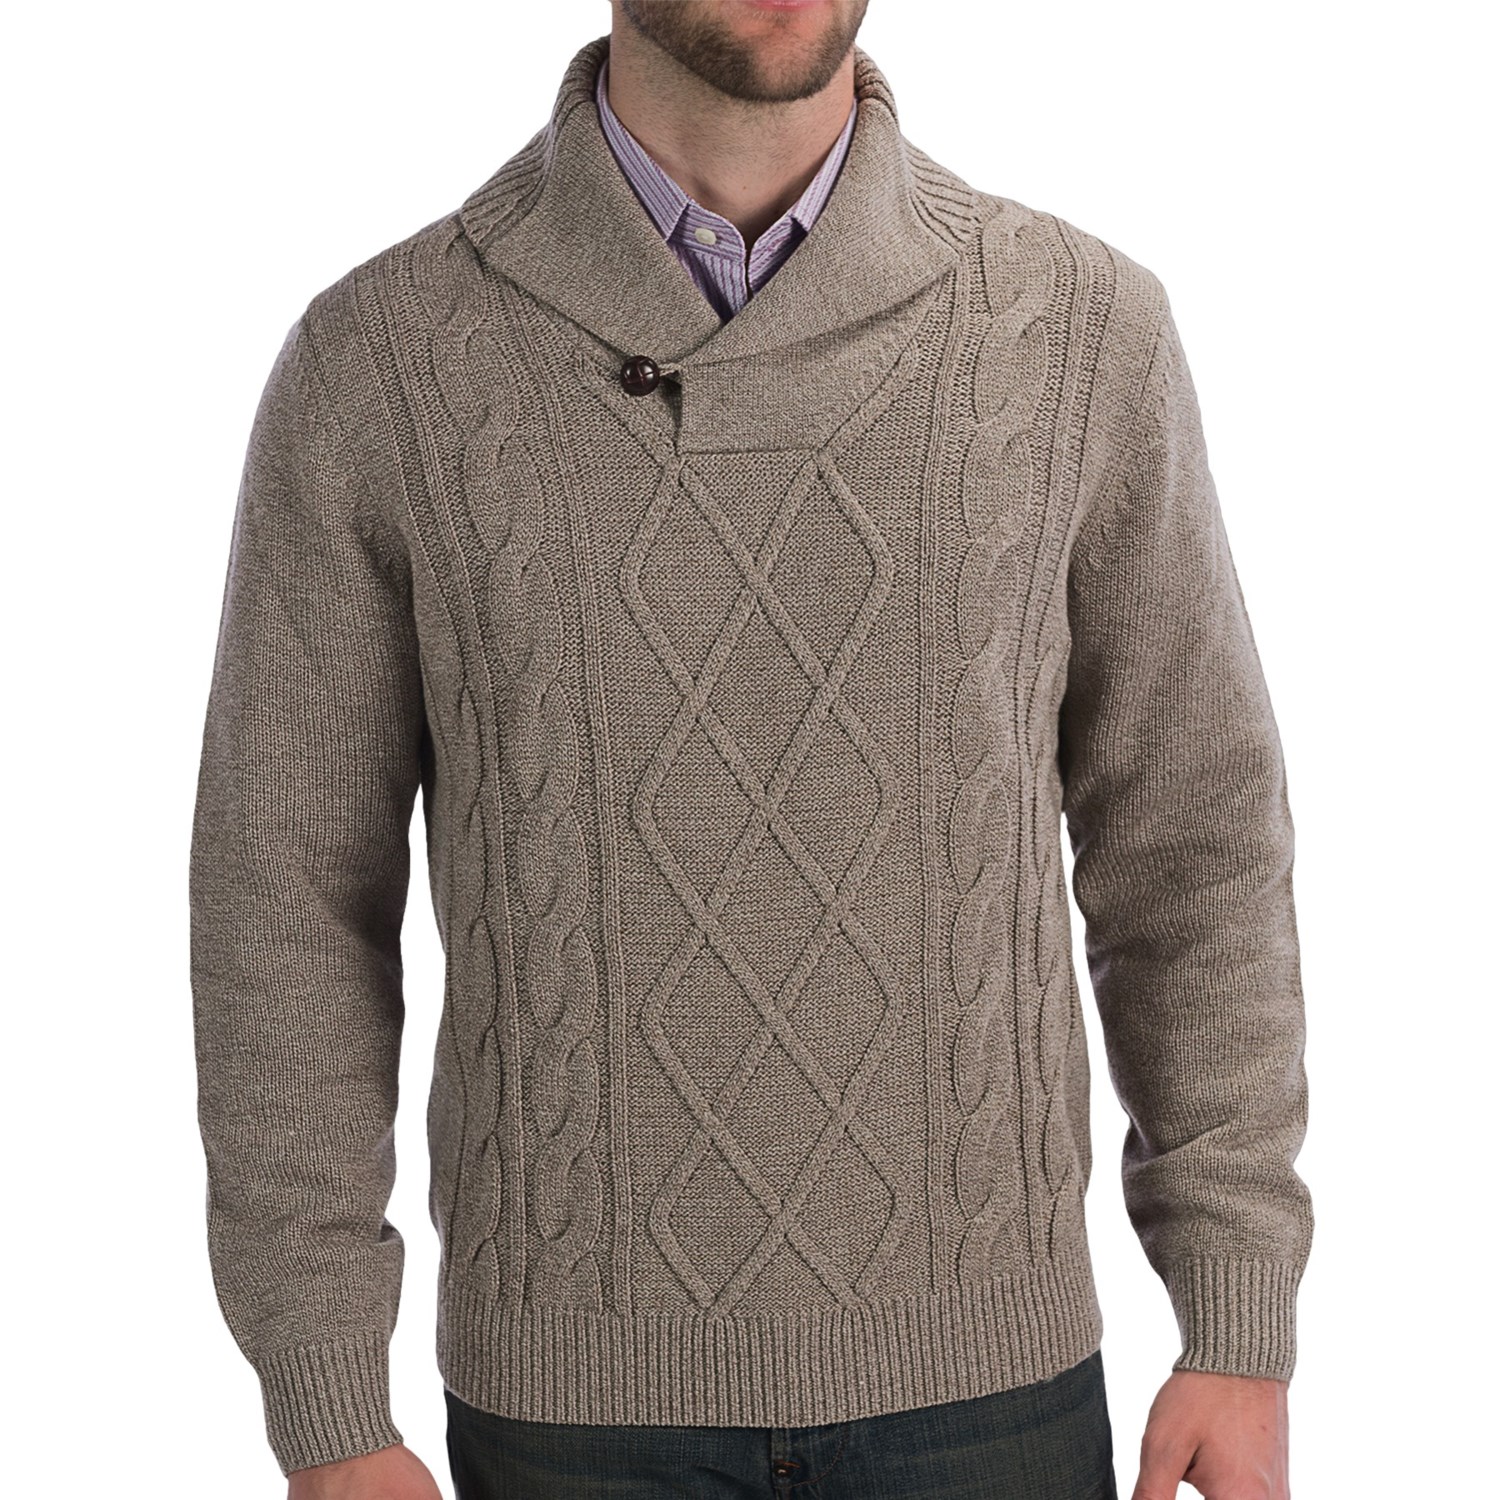 Toscano Cable-Knit Sweater (For Men) 6108A - Save 78%